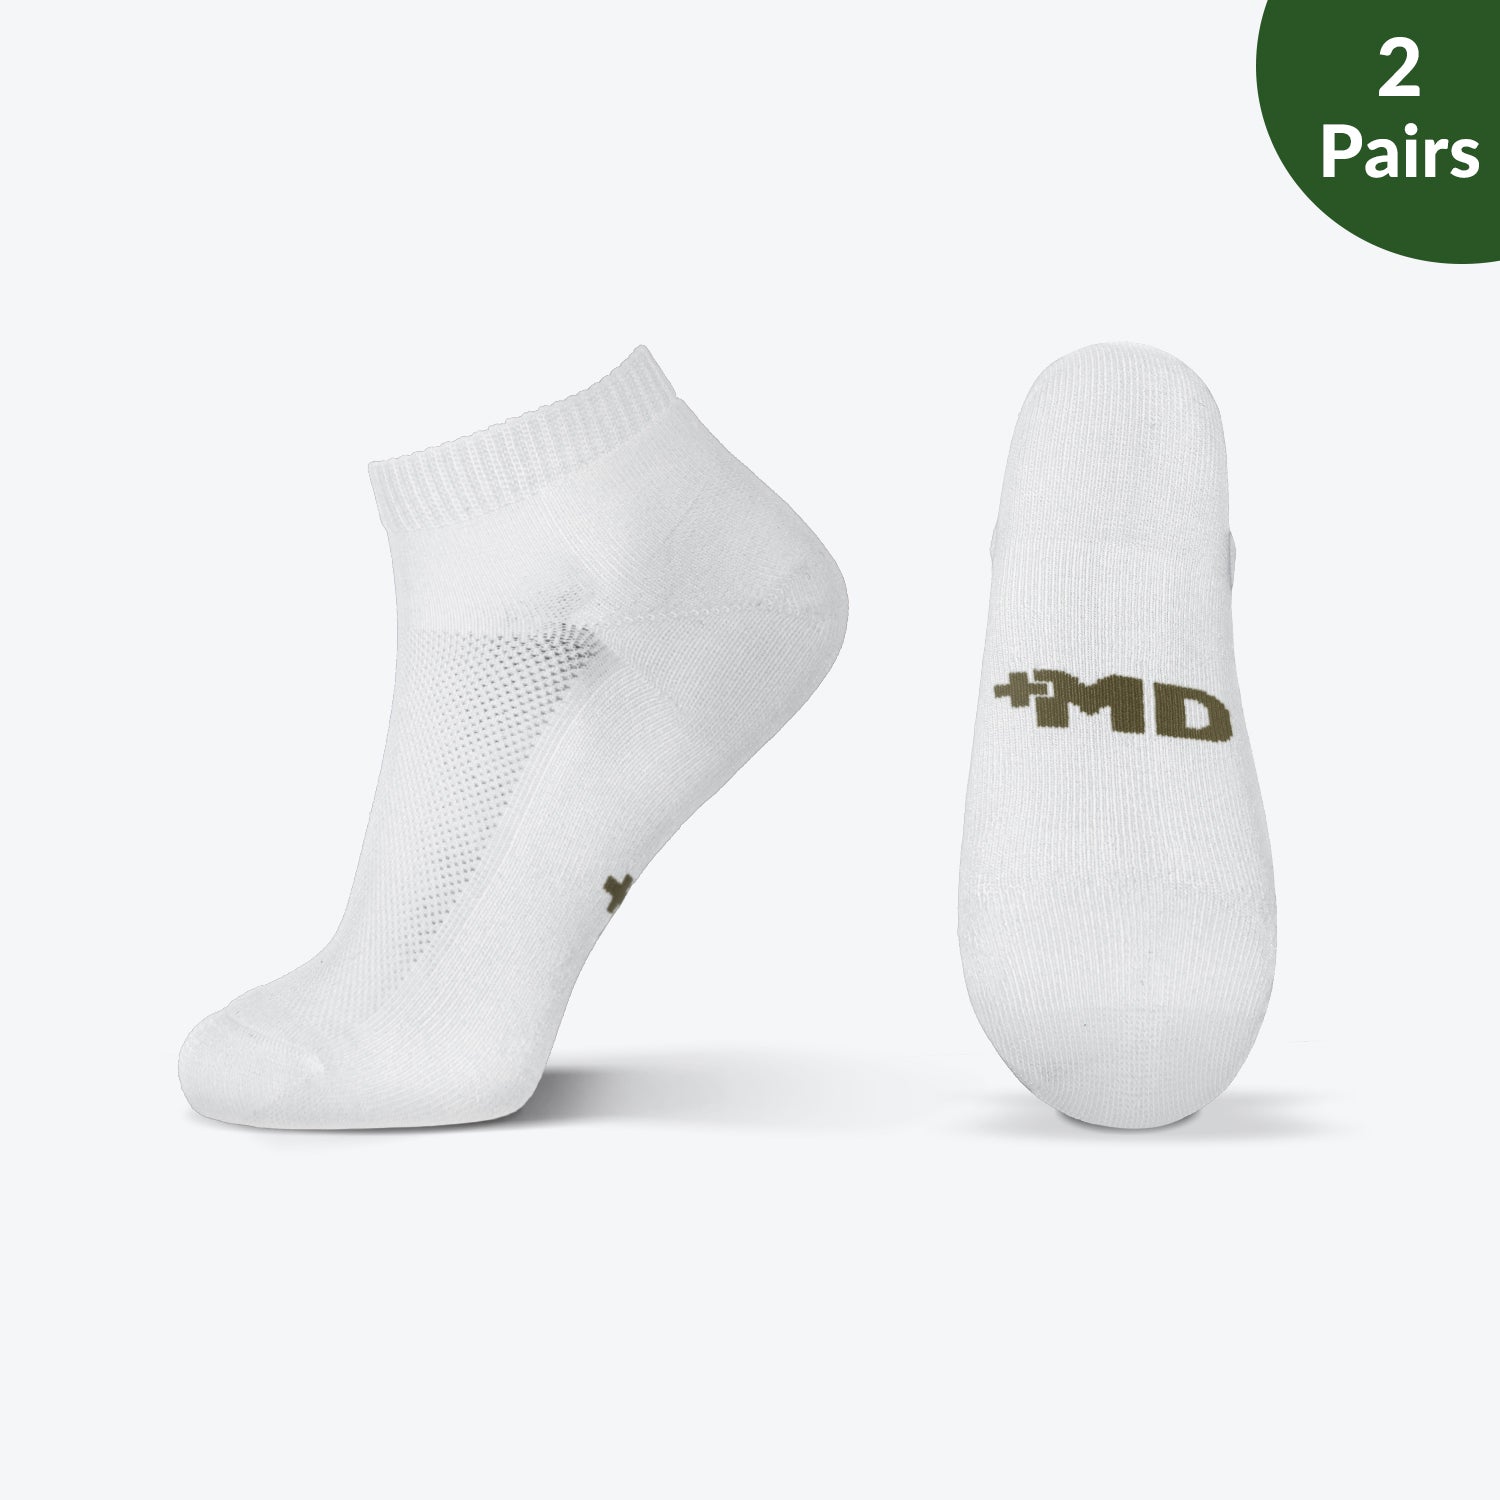 Unisex Premium Ultra Soft Bamboo Socks, 2 Pairs - US Free-Shipping For Try